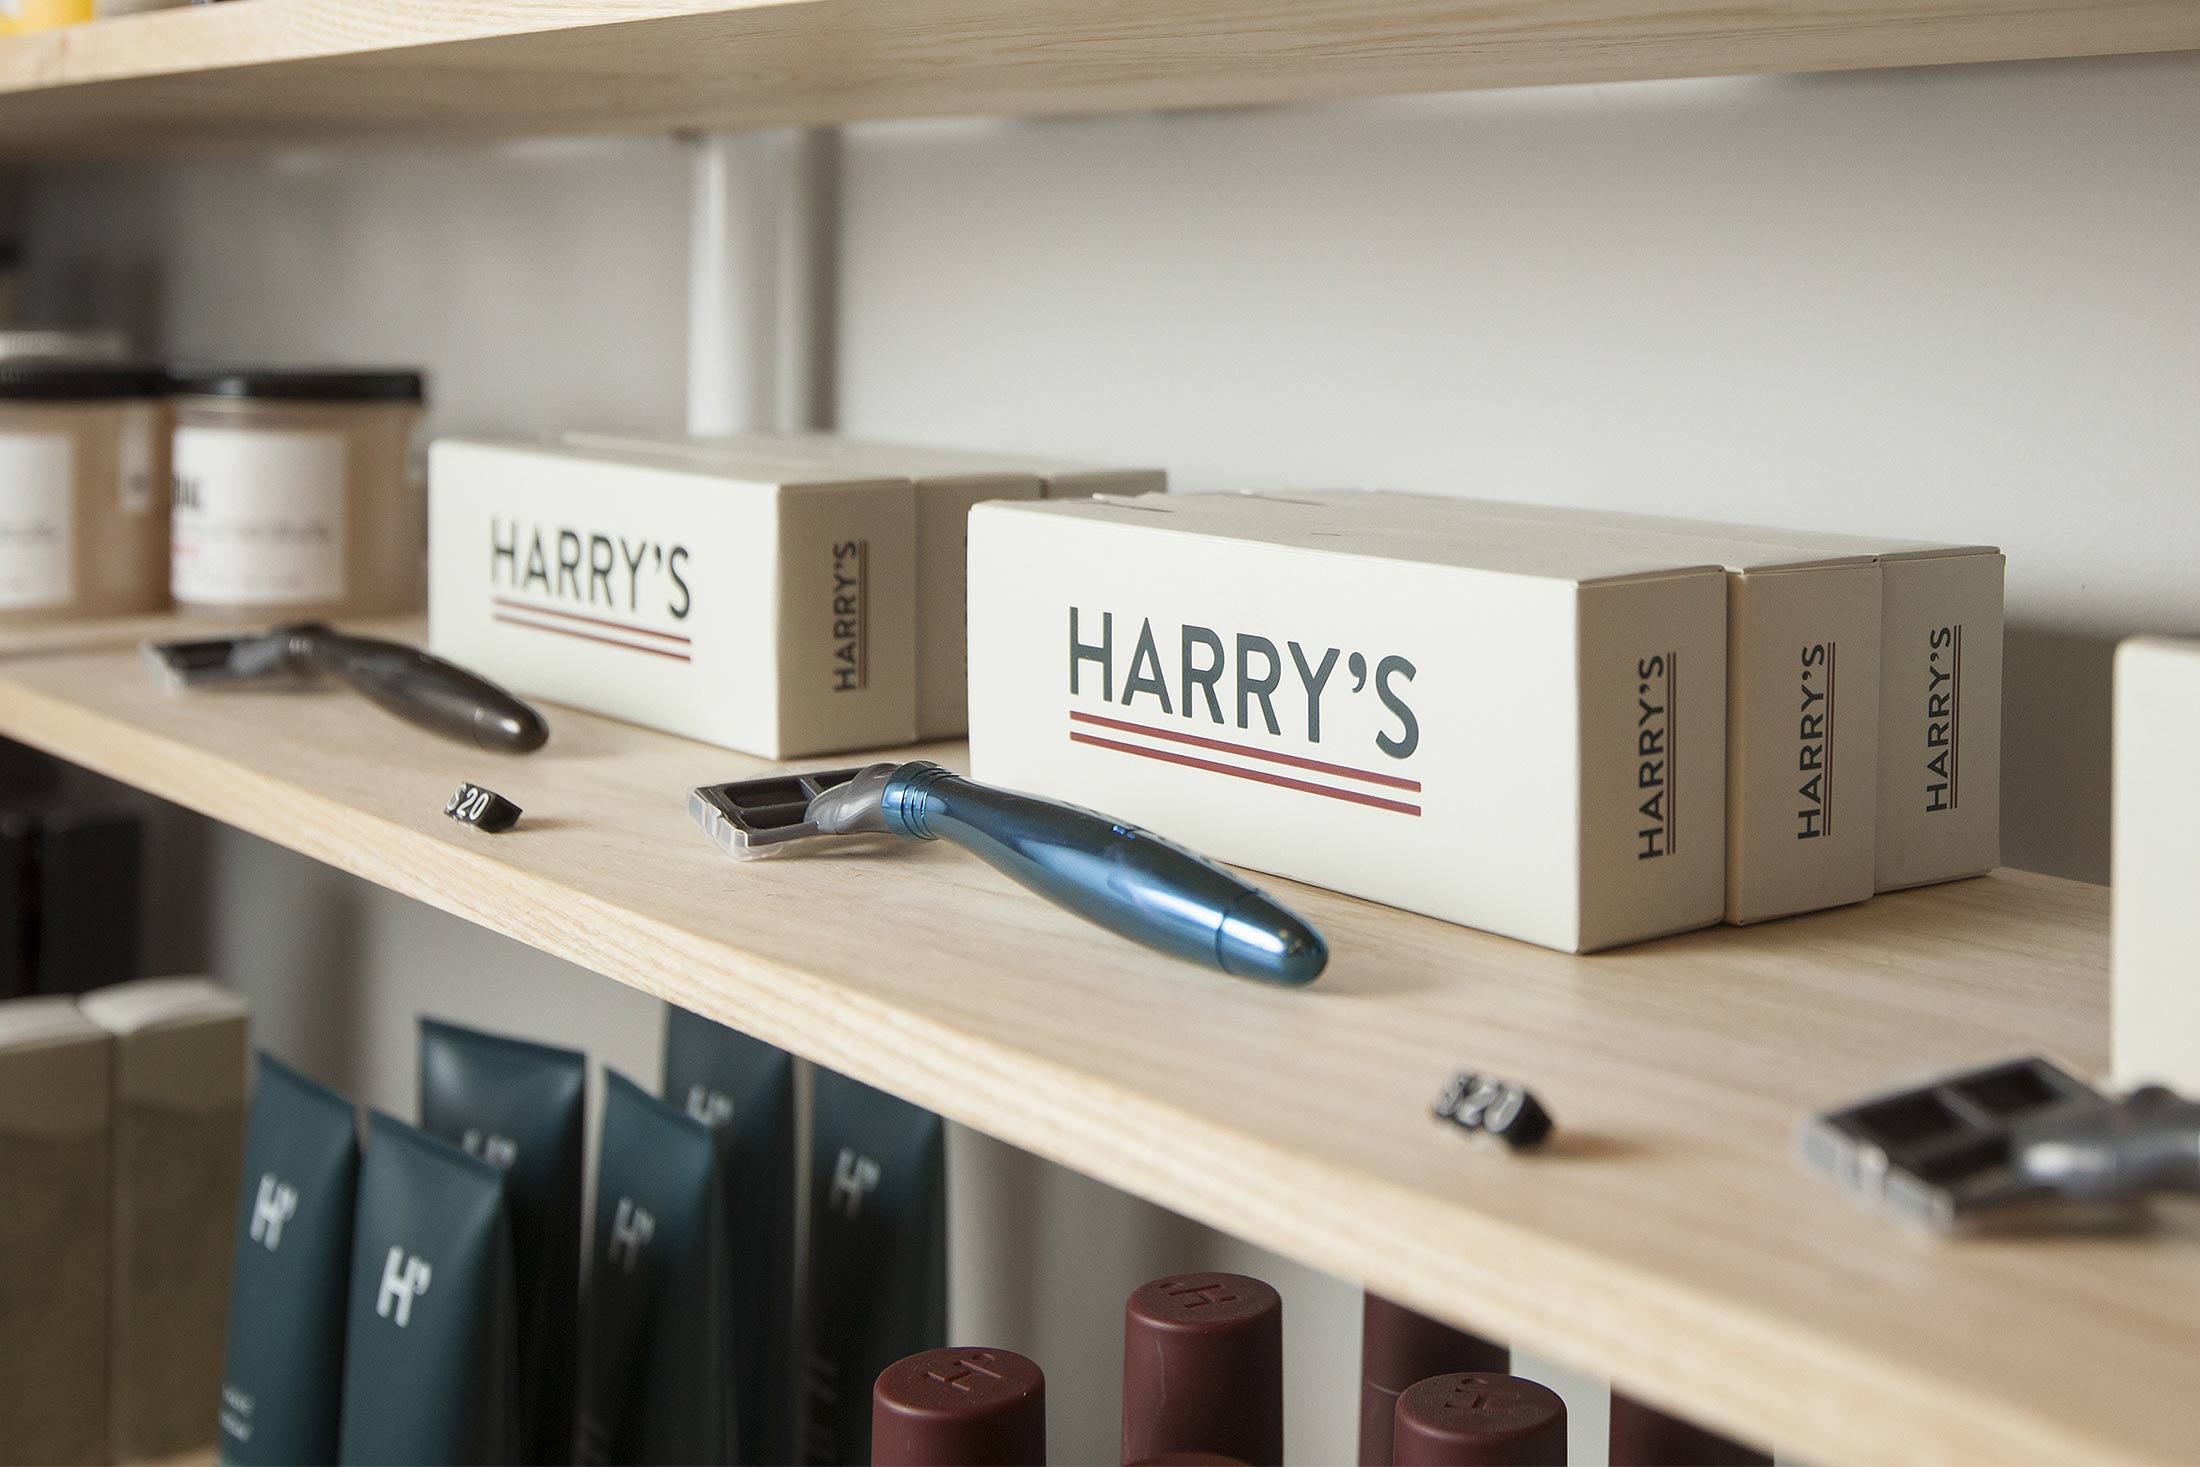 Products inside a  brick-and-mortar store for Harry's, the online purveyor of subscription shaving razors and other grooming items primarily for men, in New York.